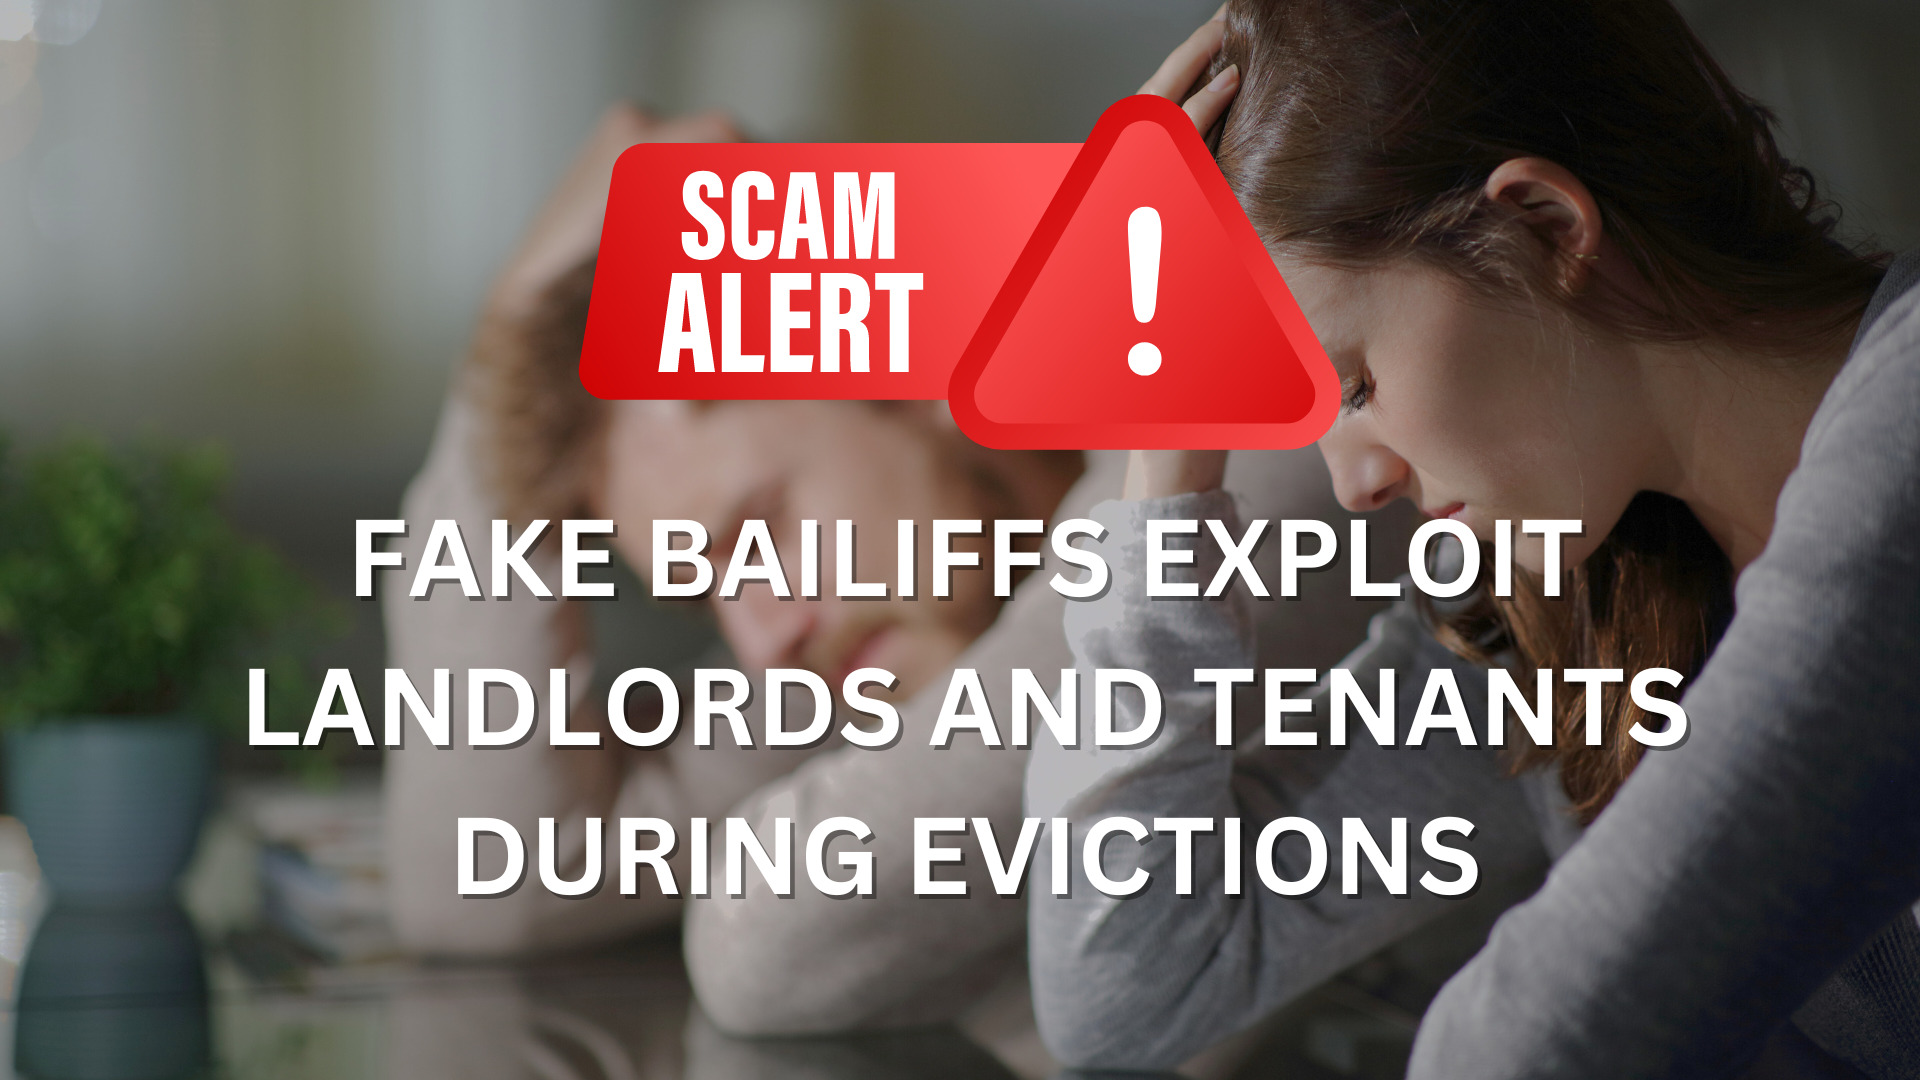 SCAM ALERT! – Fake Bailiffs Exploit Landlords and Tenants During Evictions